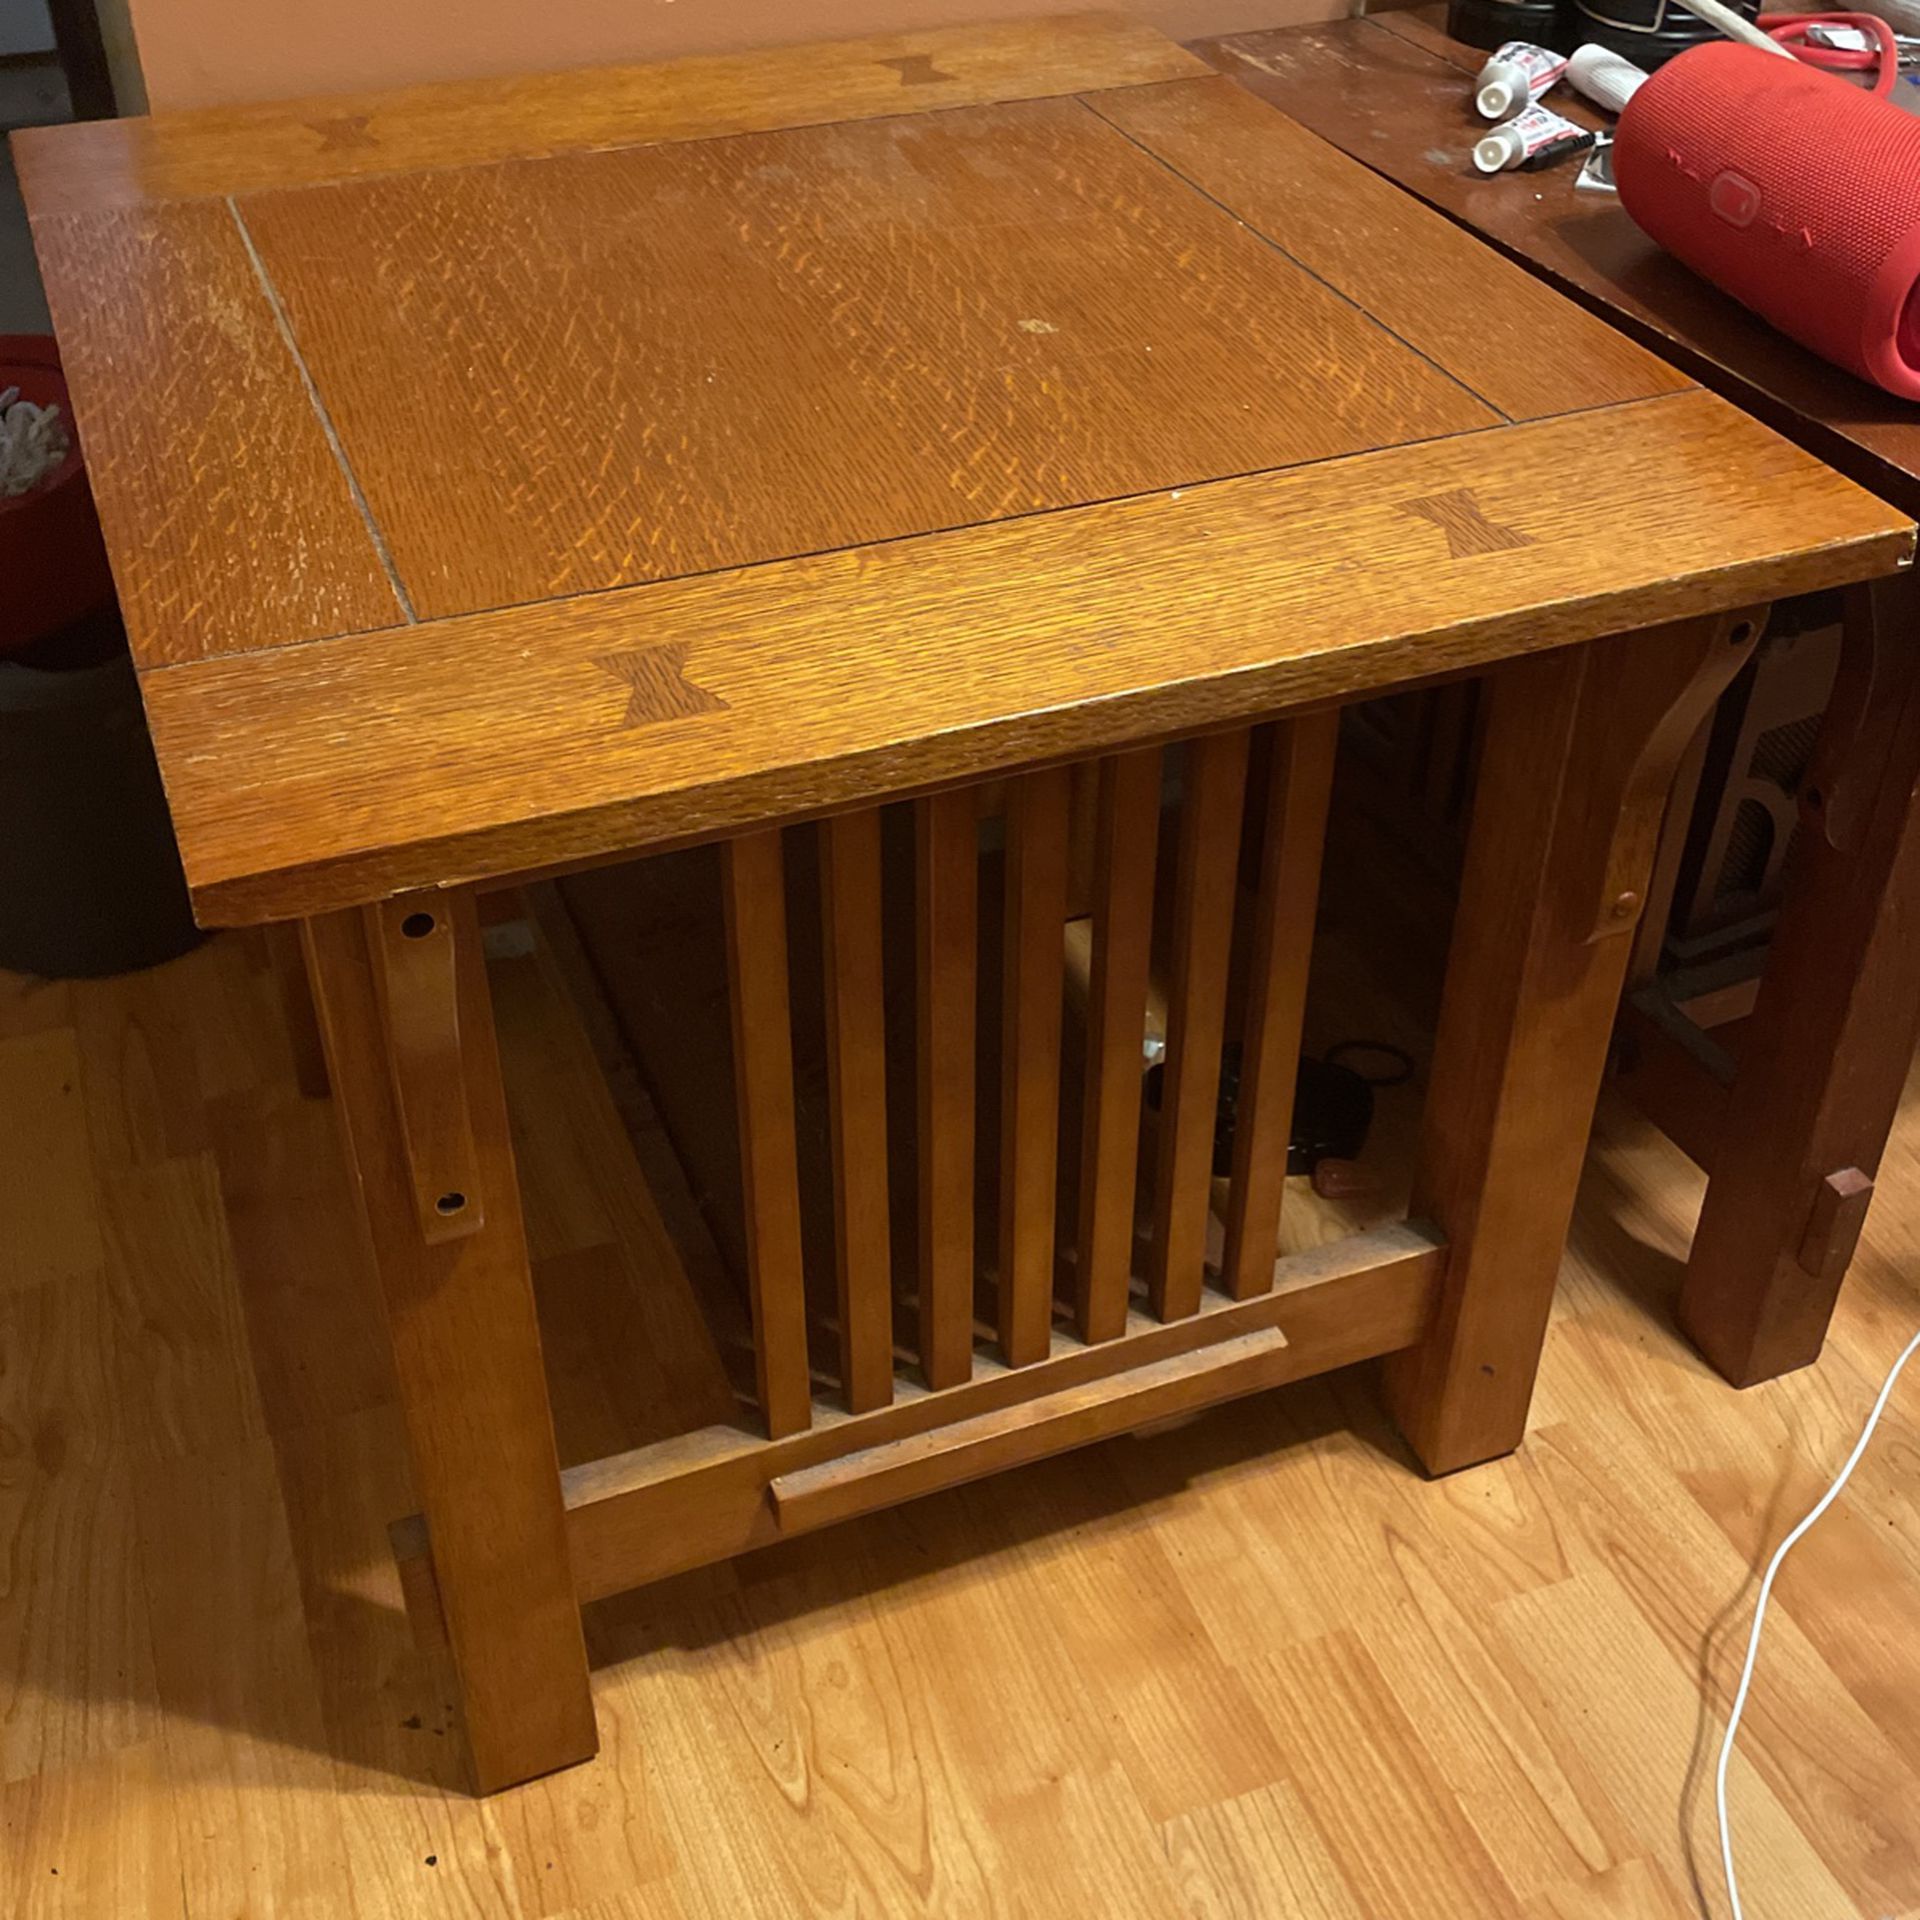 3 Pc Missionary Tables, Cocktail And 2 End Tables $75